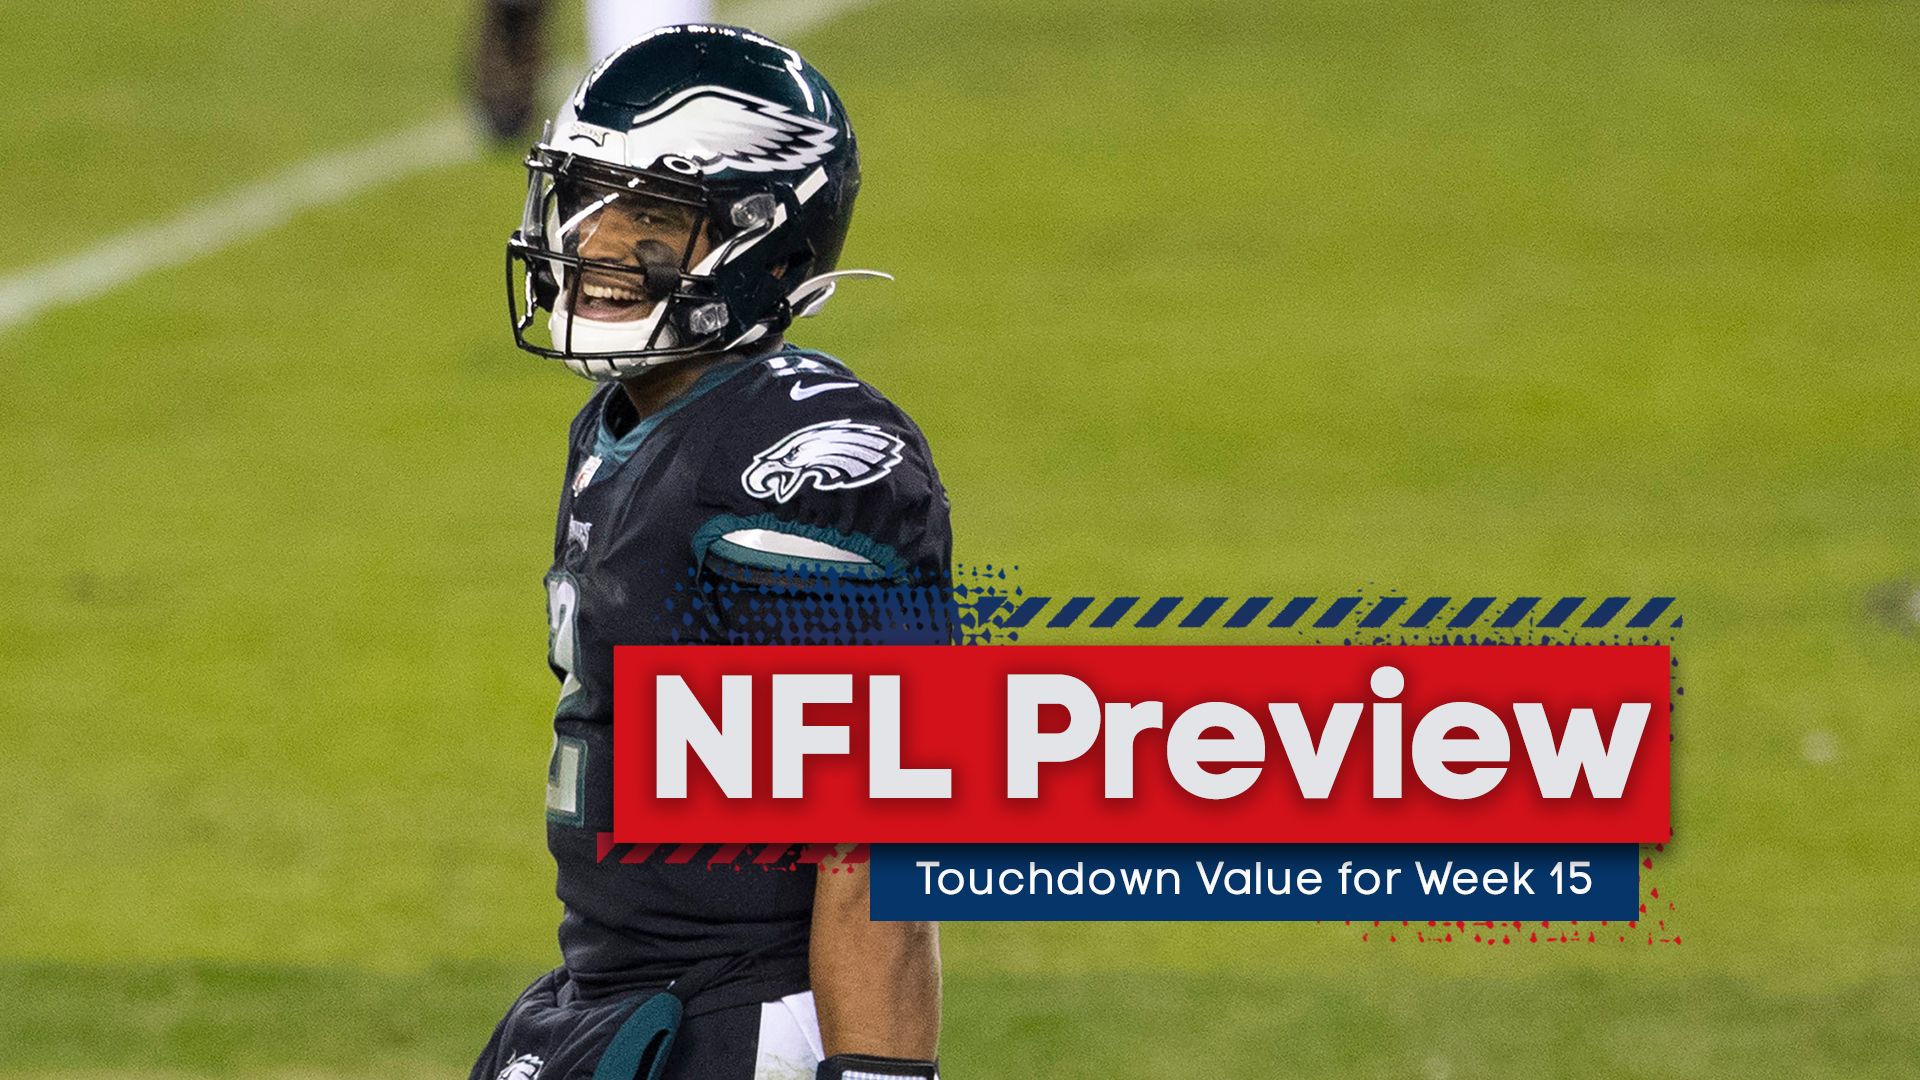 Free NFL betting tips, picks and predictions: Week 15 value